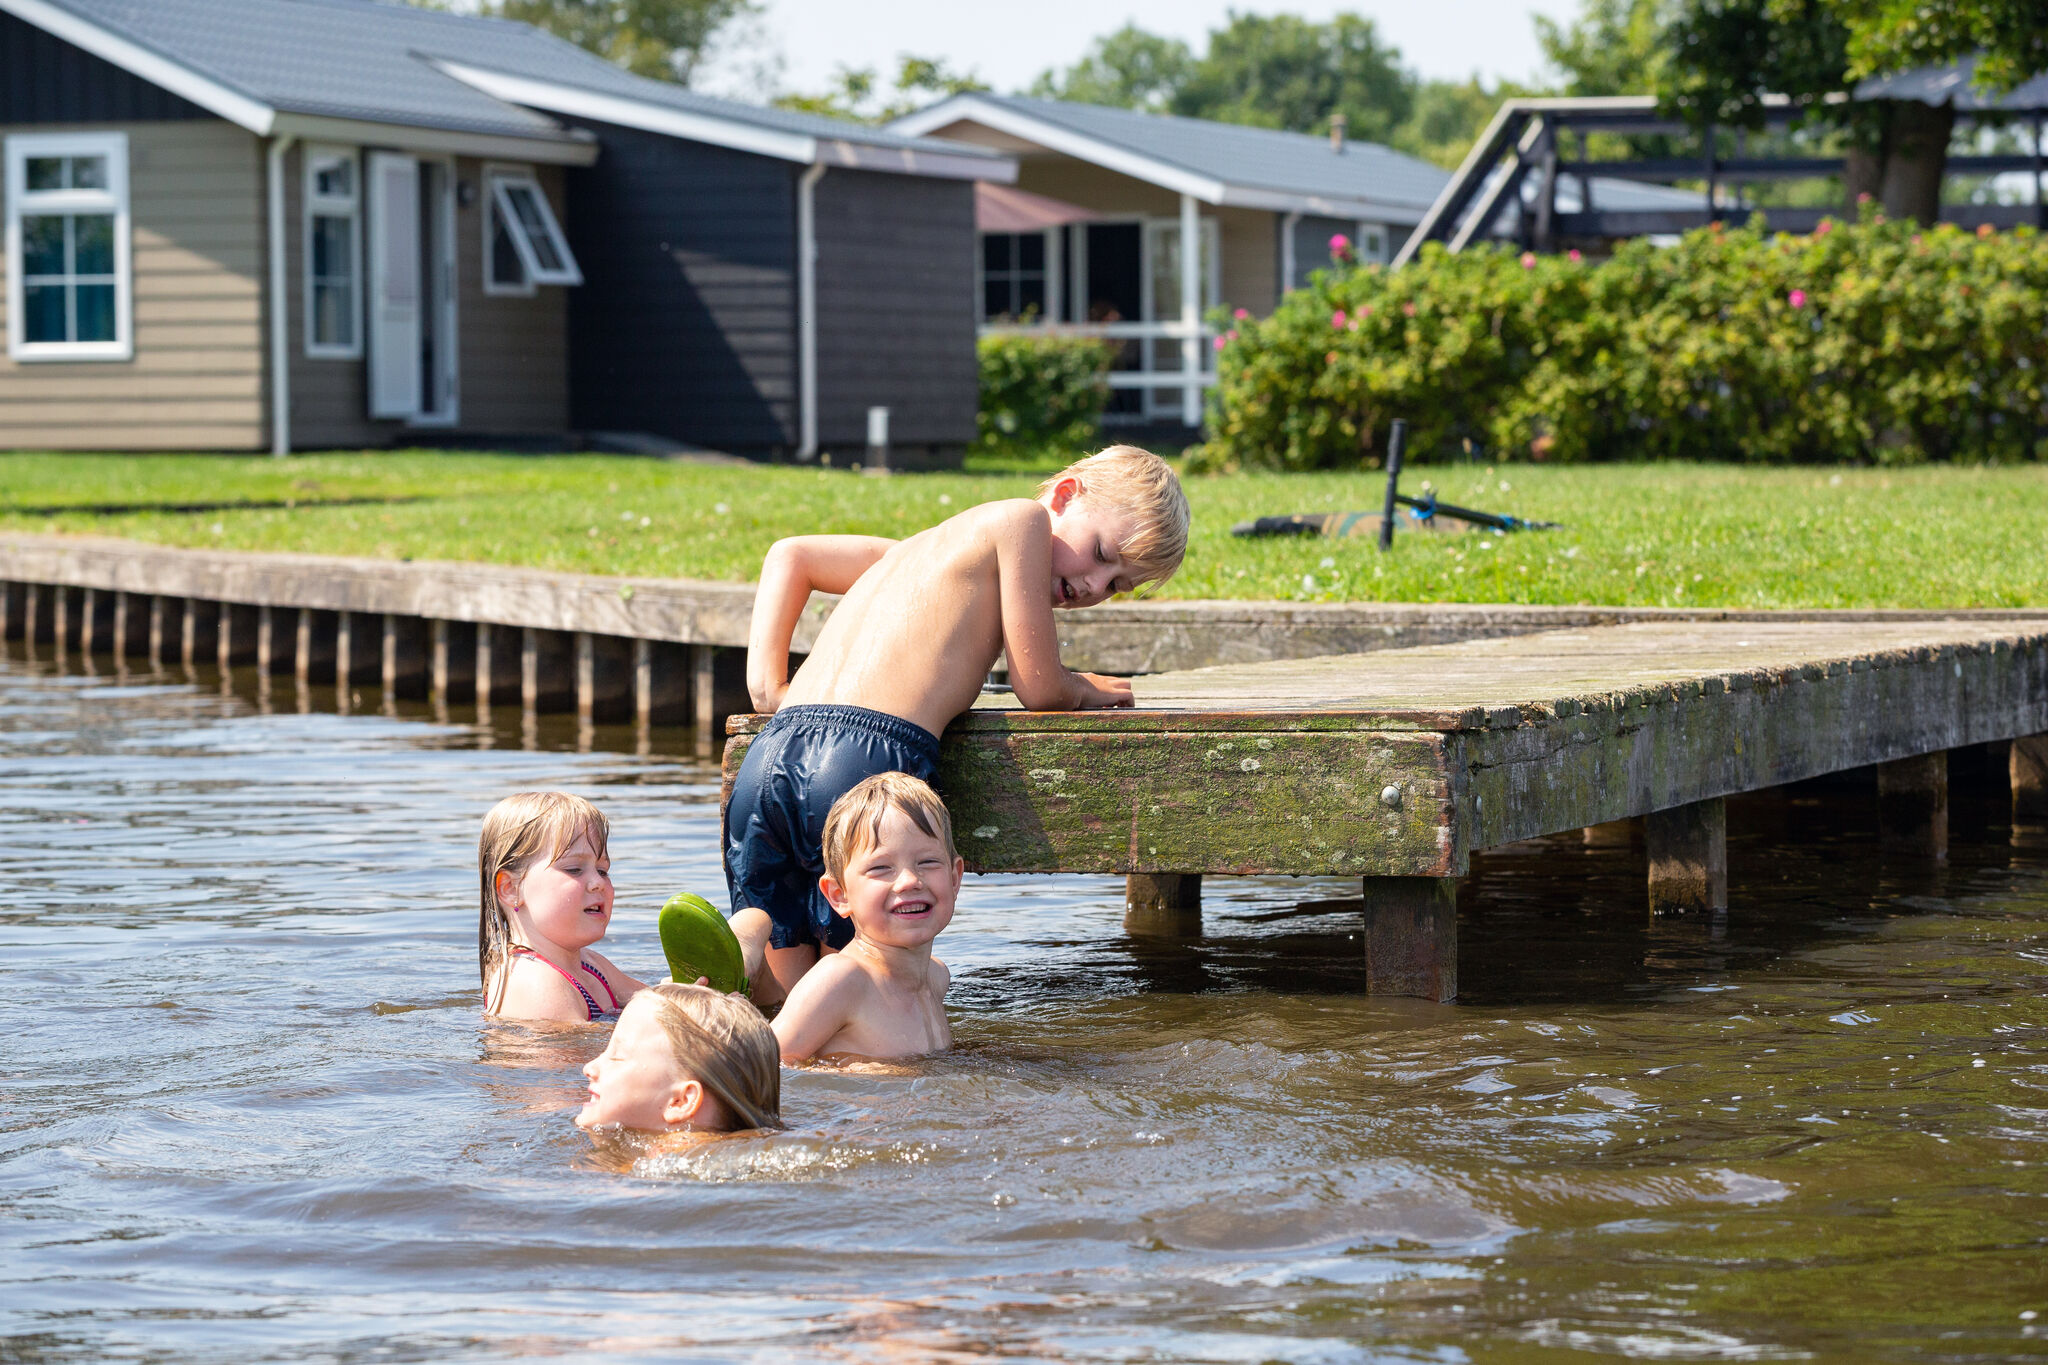 Composite group home with ac and sloop, in a holiday park in beautyful Giethoorn